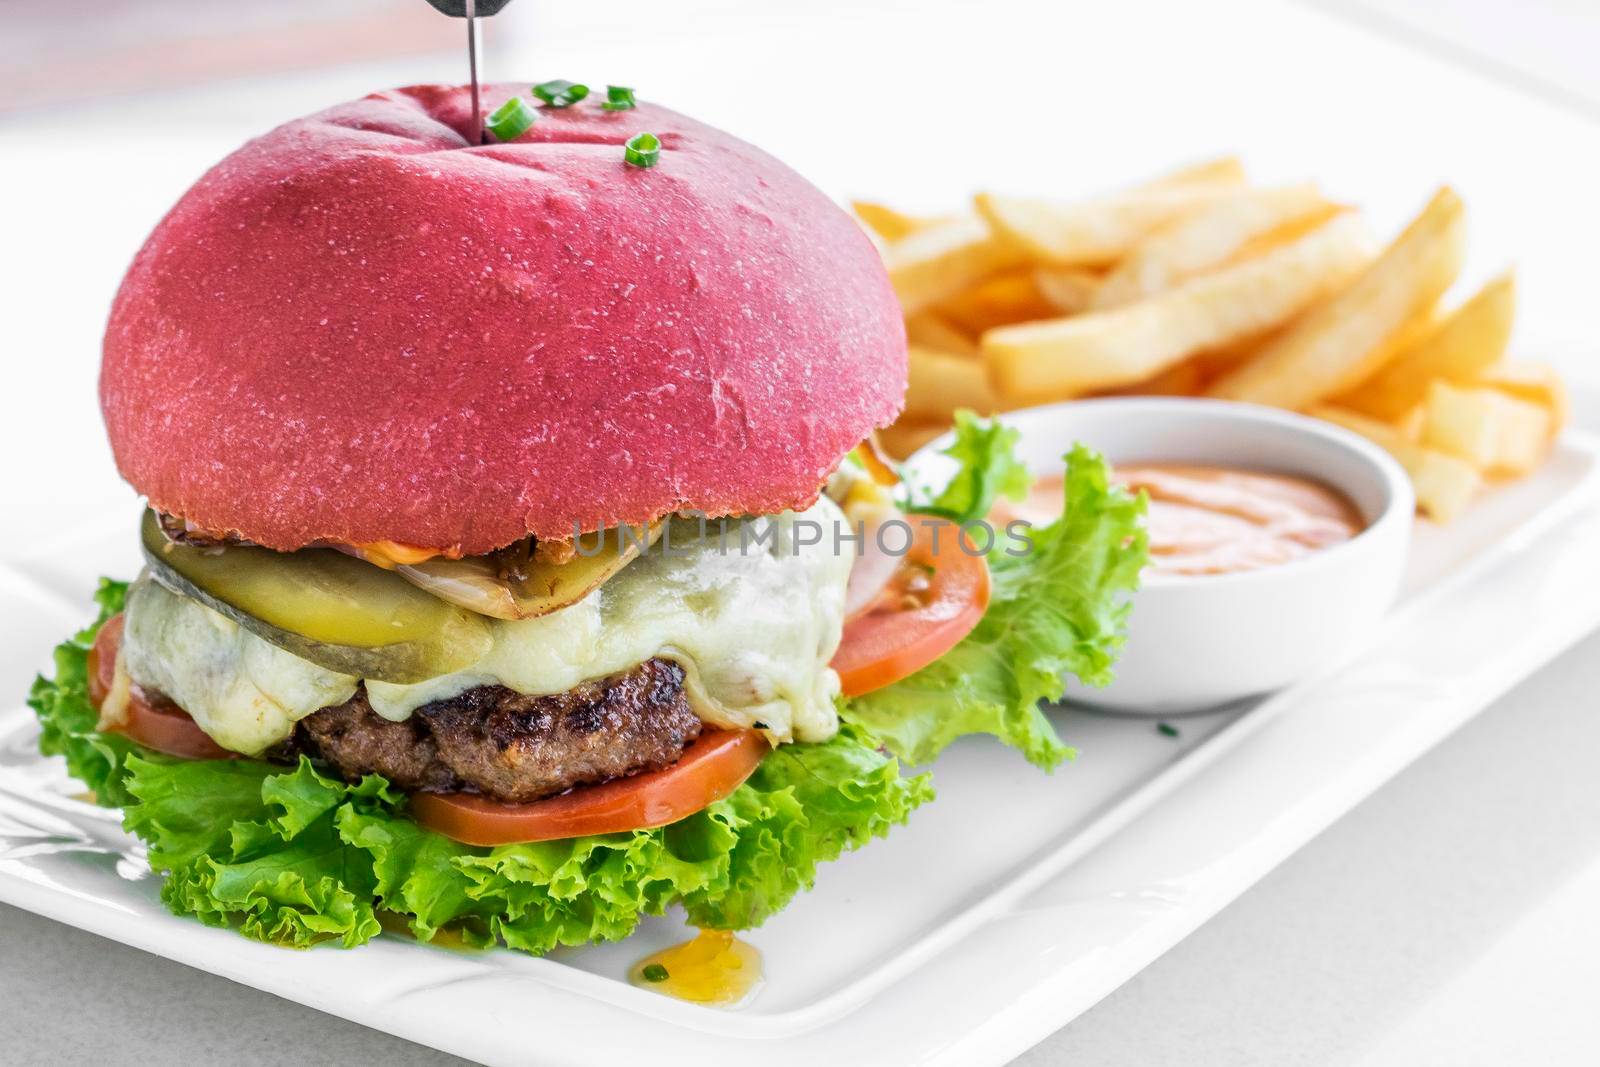 beetroot red bun cheeseburger set with fries and chilli mayo by jackmalipan